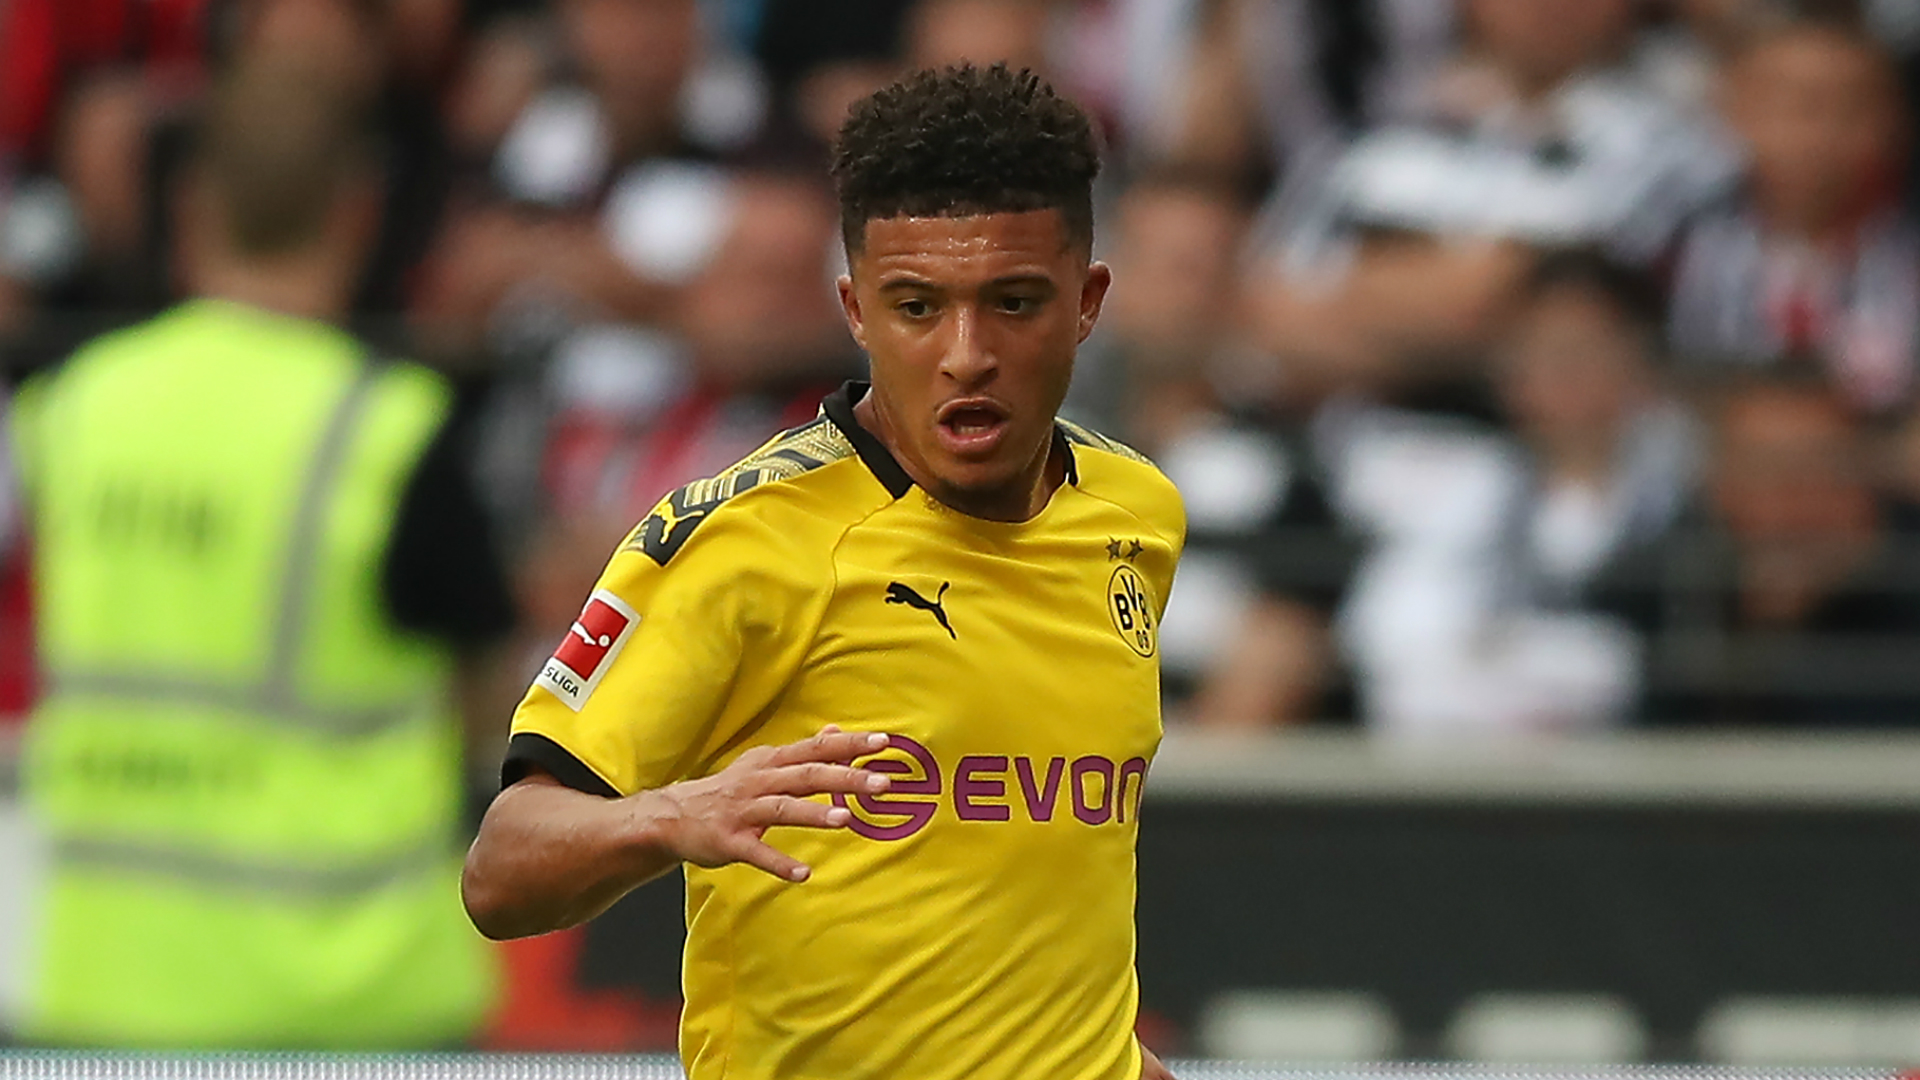 Jadon Sancho was benched for Borussia Dortmund's last league outing and boss Lucien Favre wants to continue protecting the youngster.